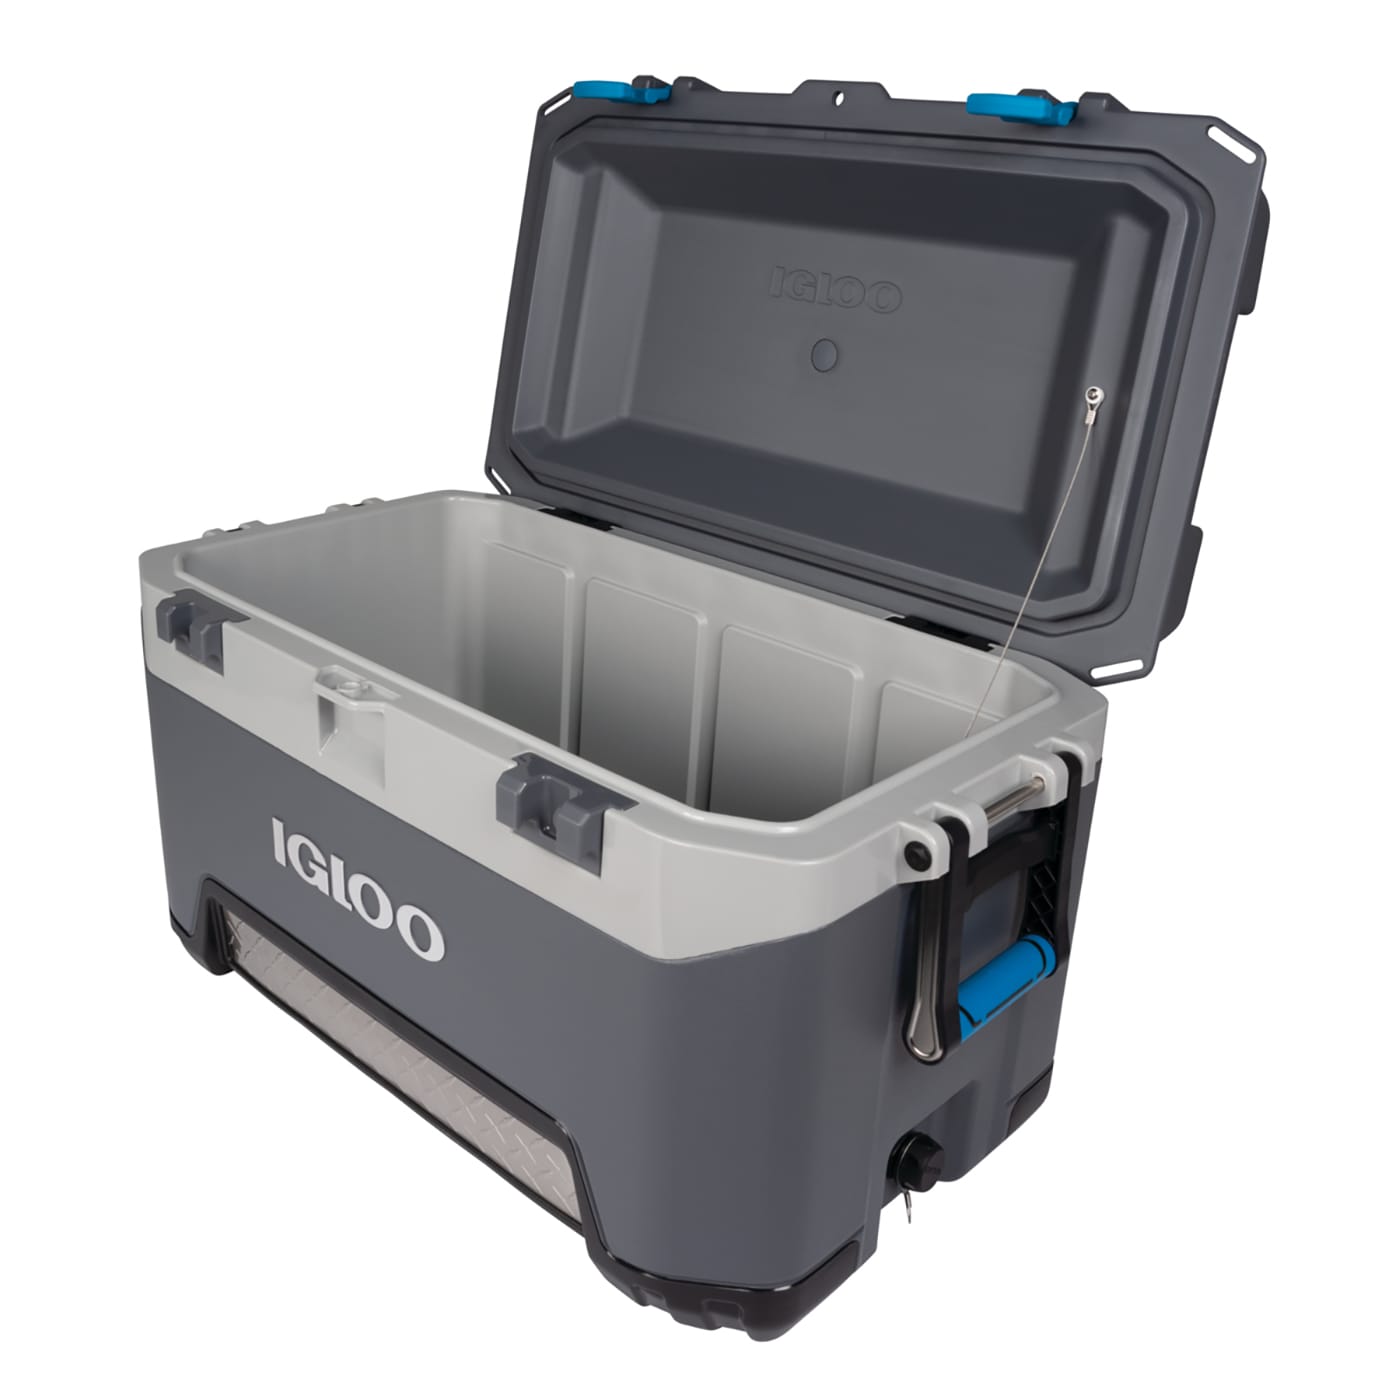 IGLOO Cooler Heavy Duty Blow Molded Extra Thick Foam Walls Insulated Lids 